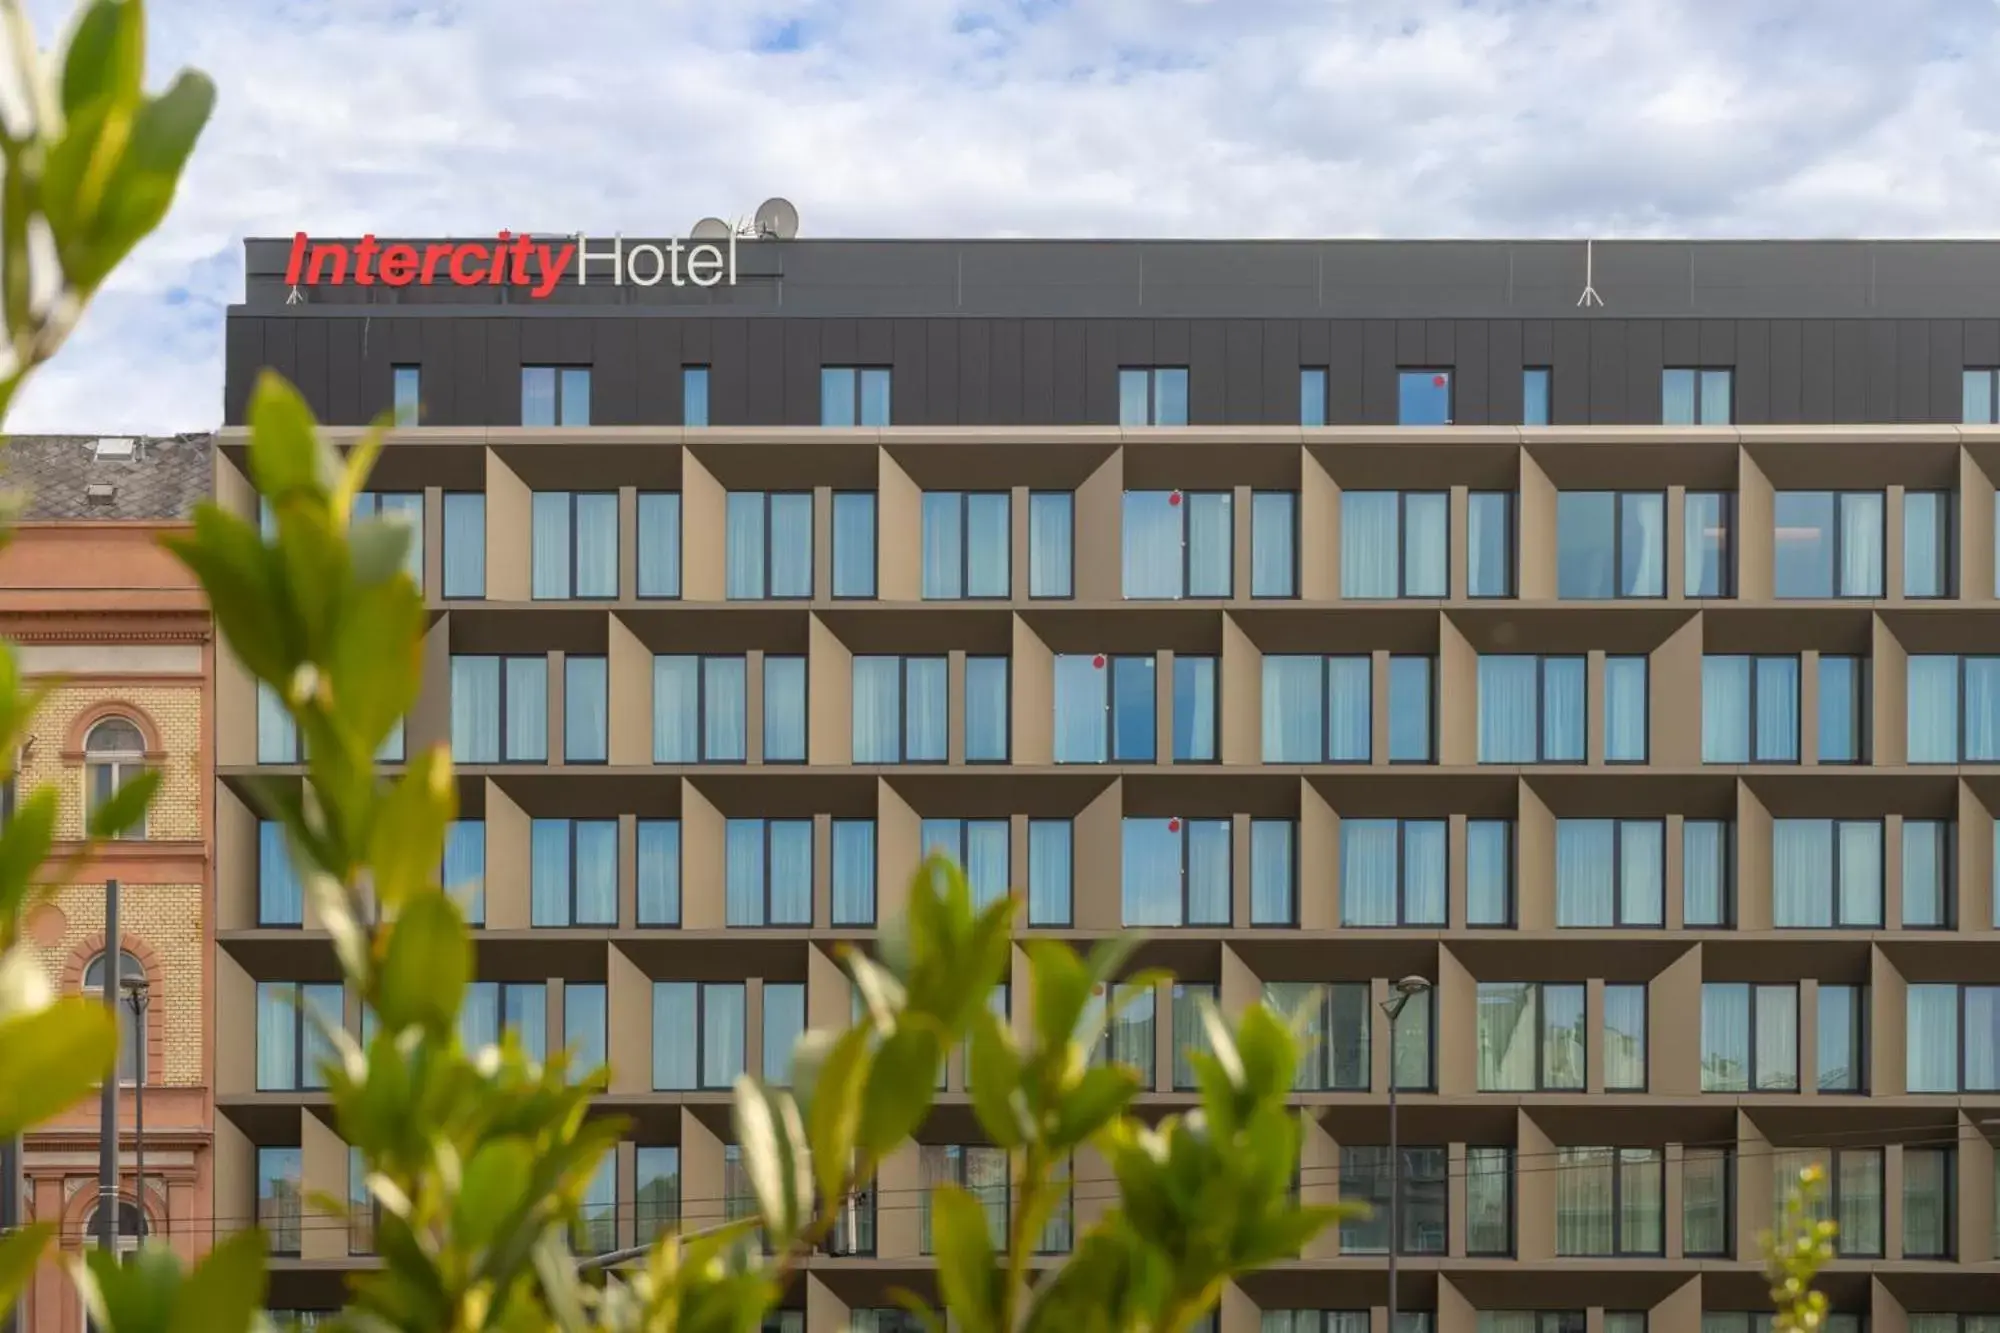 Property building in IntercityHotel Budapest